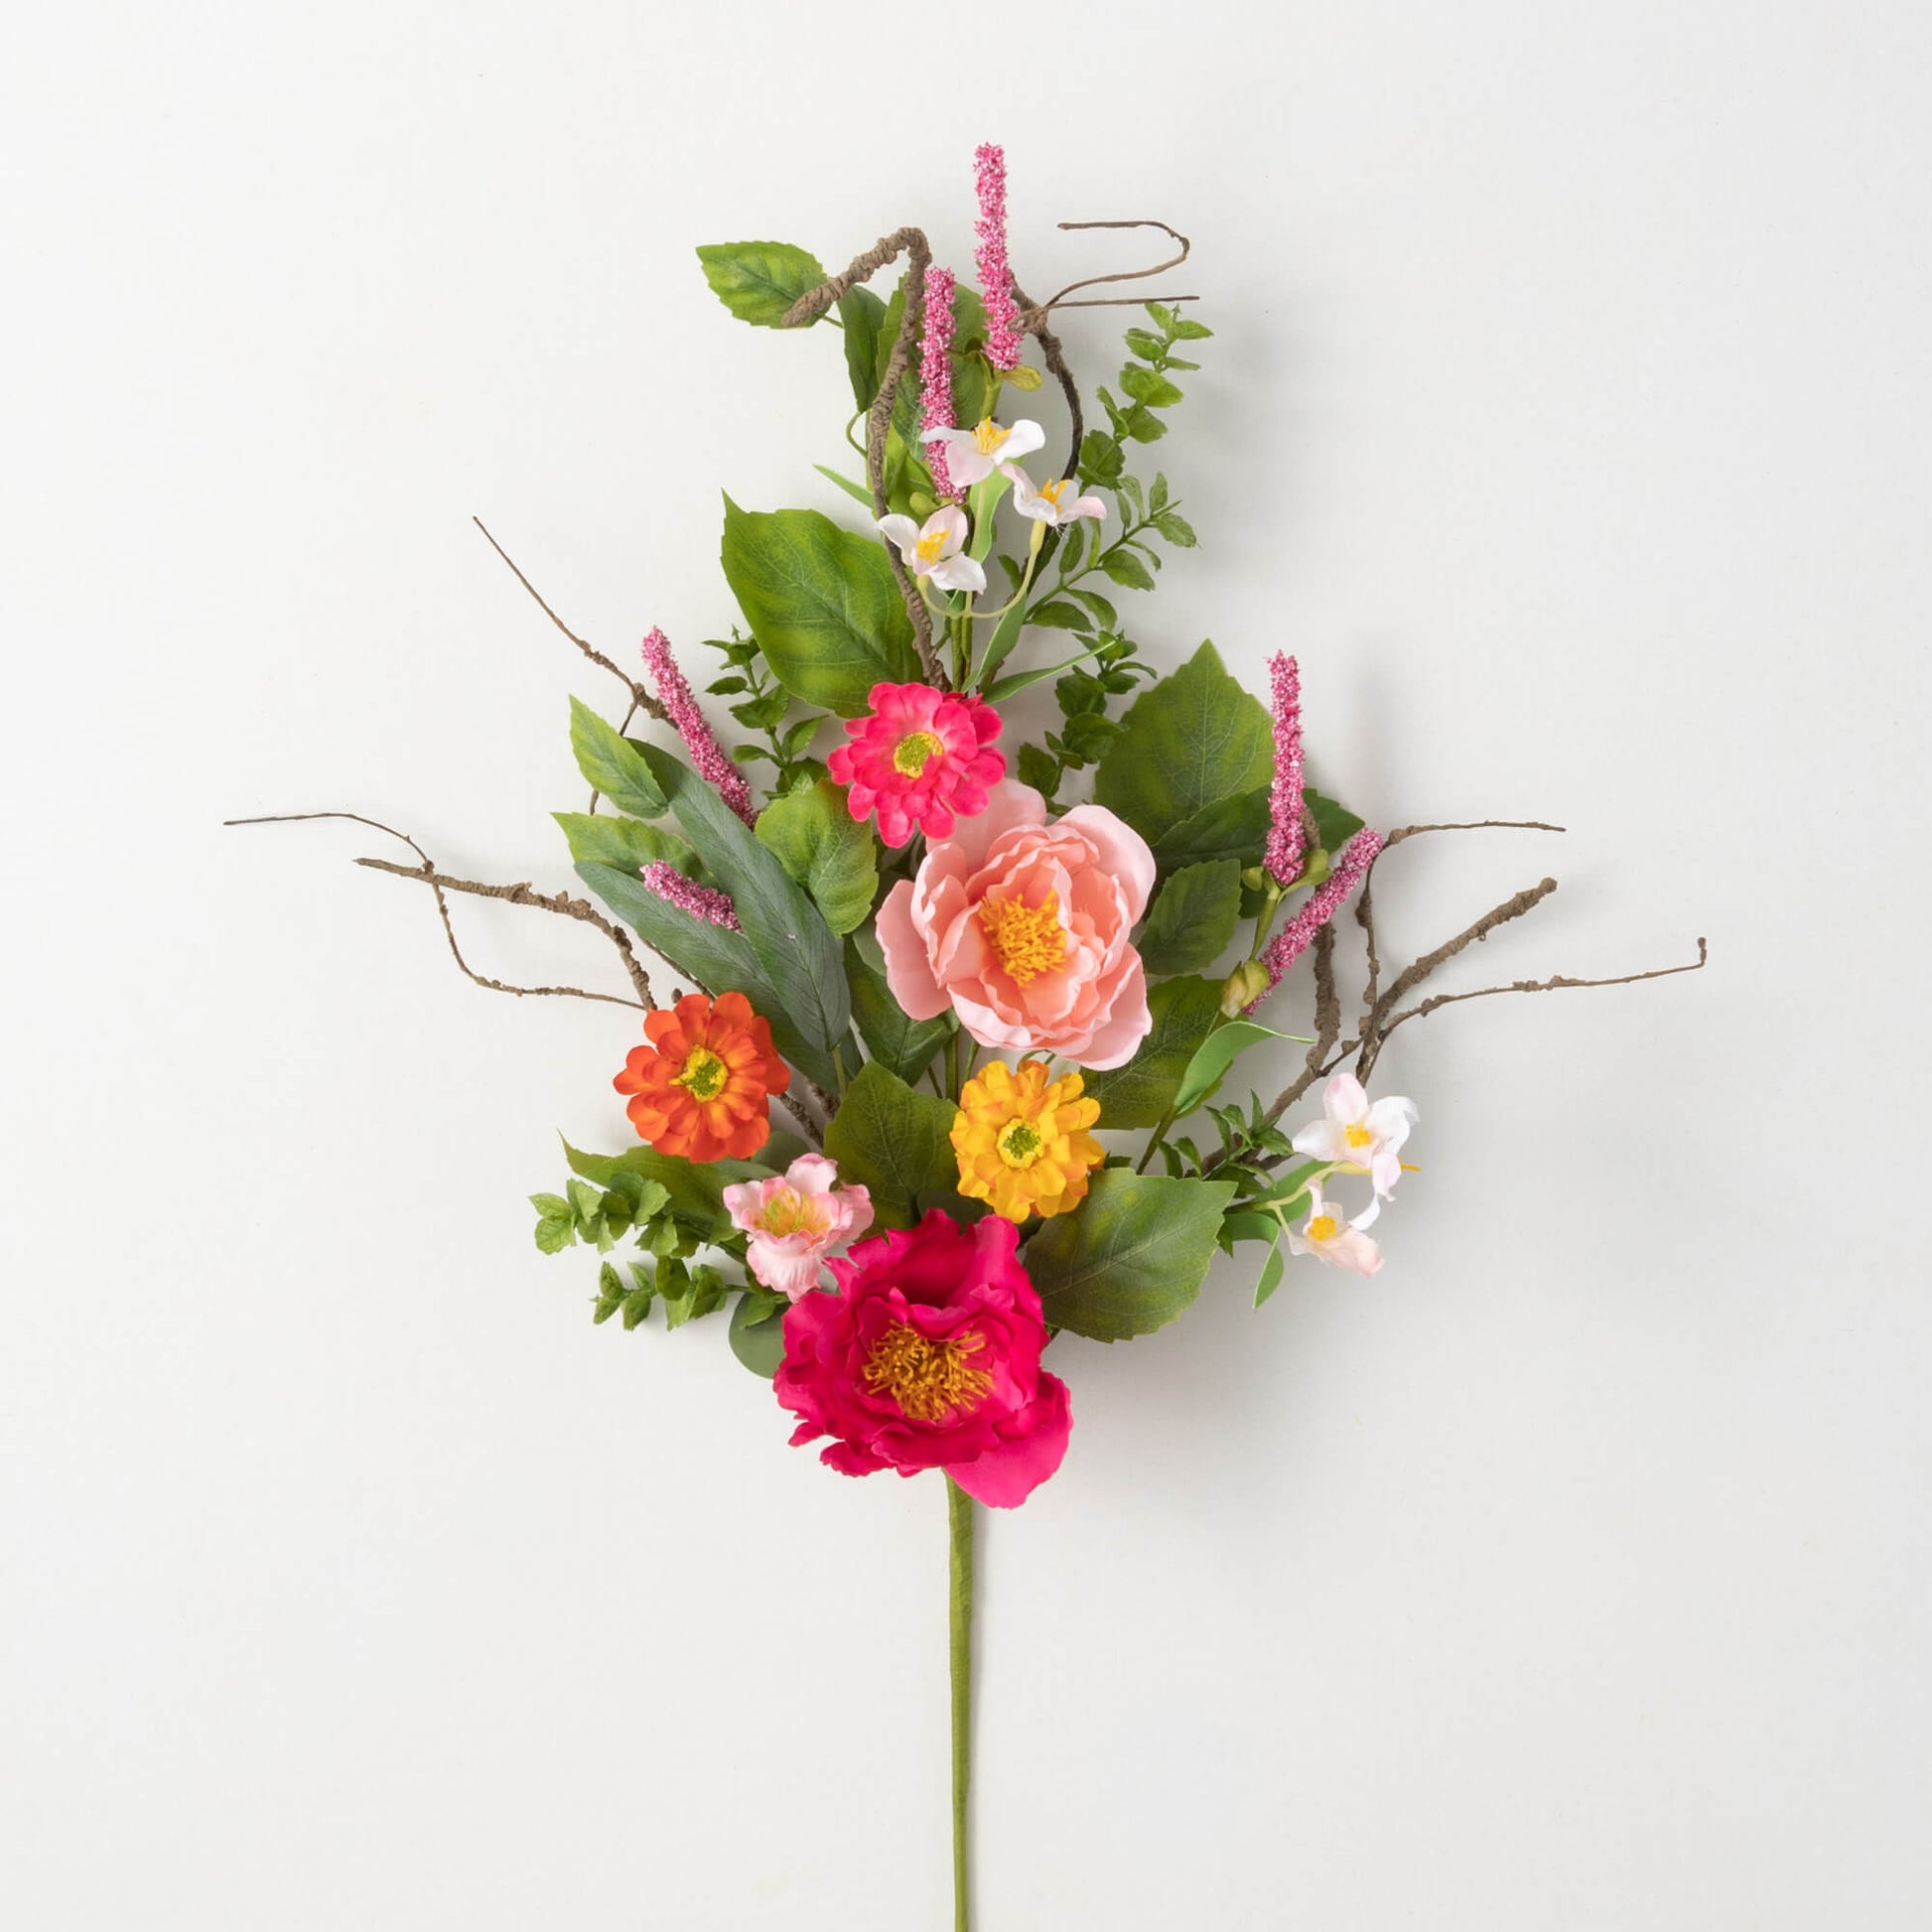 collection of artificial flowers in shades of pink, yellow, and orange with assorted green leaves.